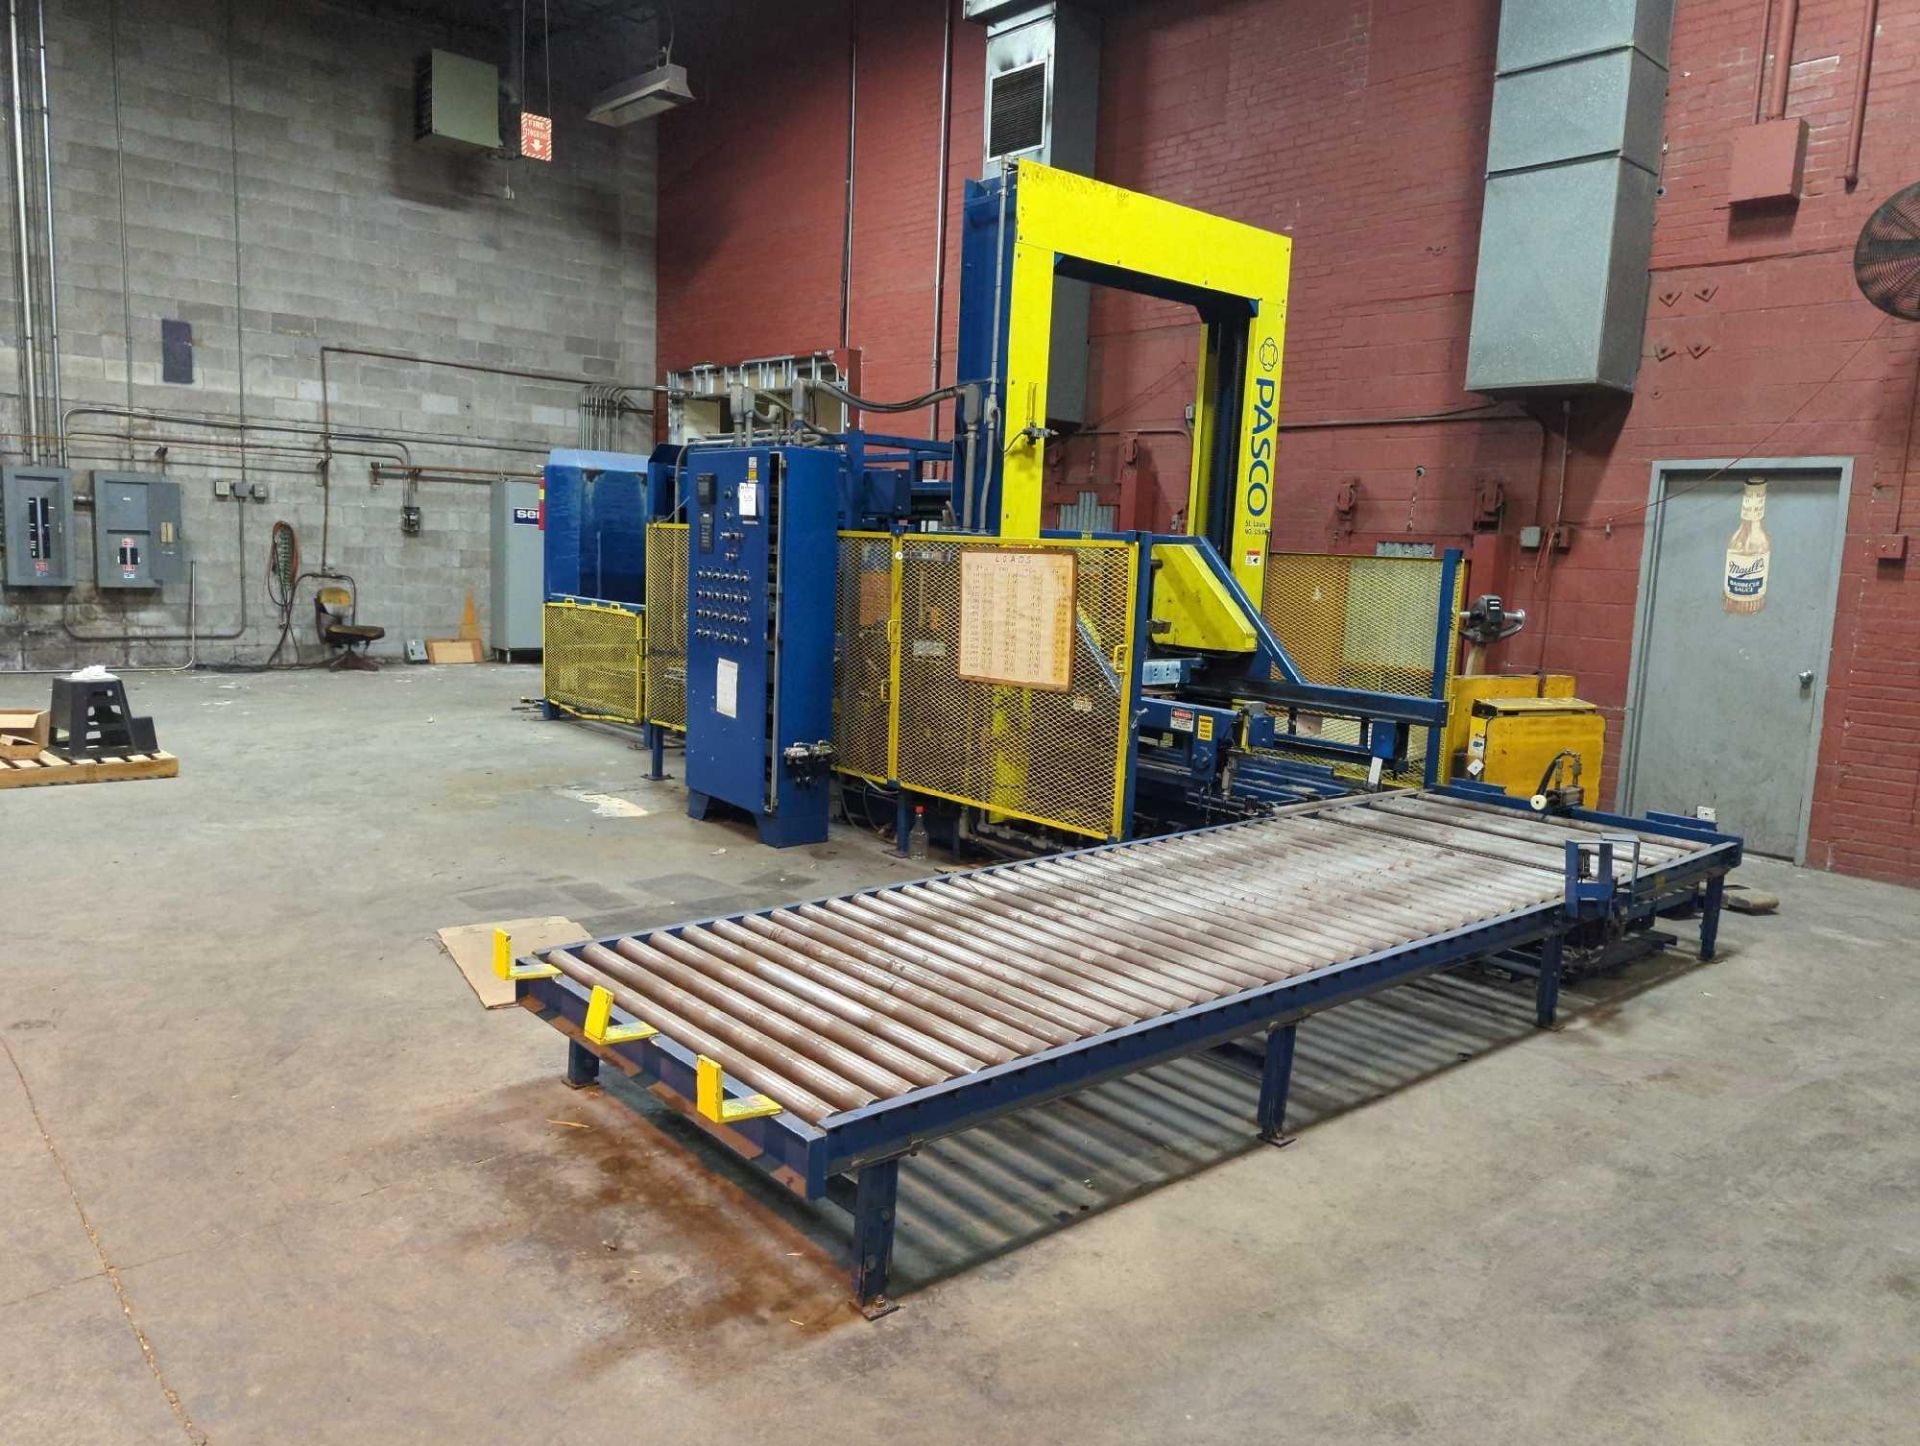 Pasco 6650 Low Level Infeed Palletizer